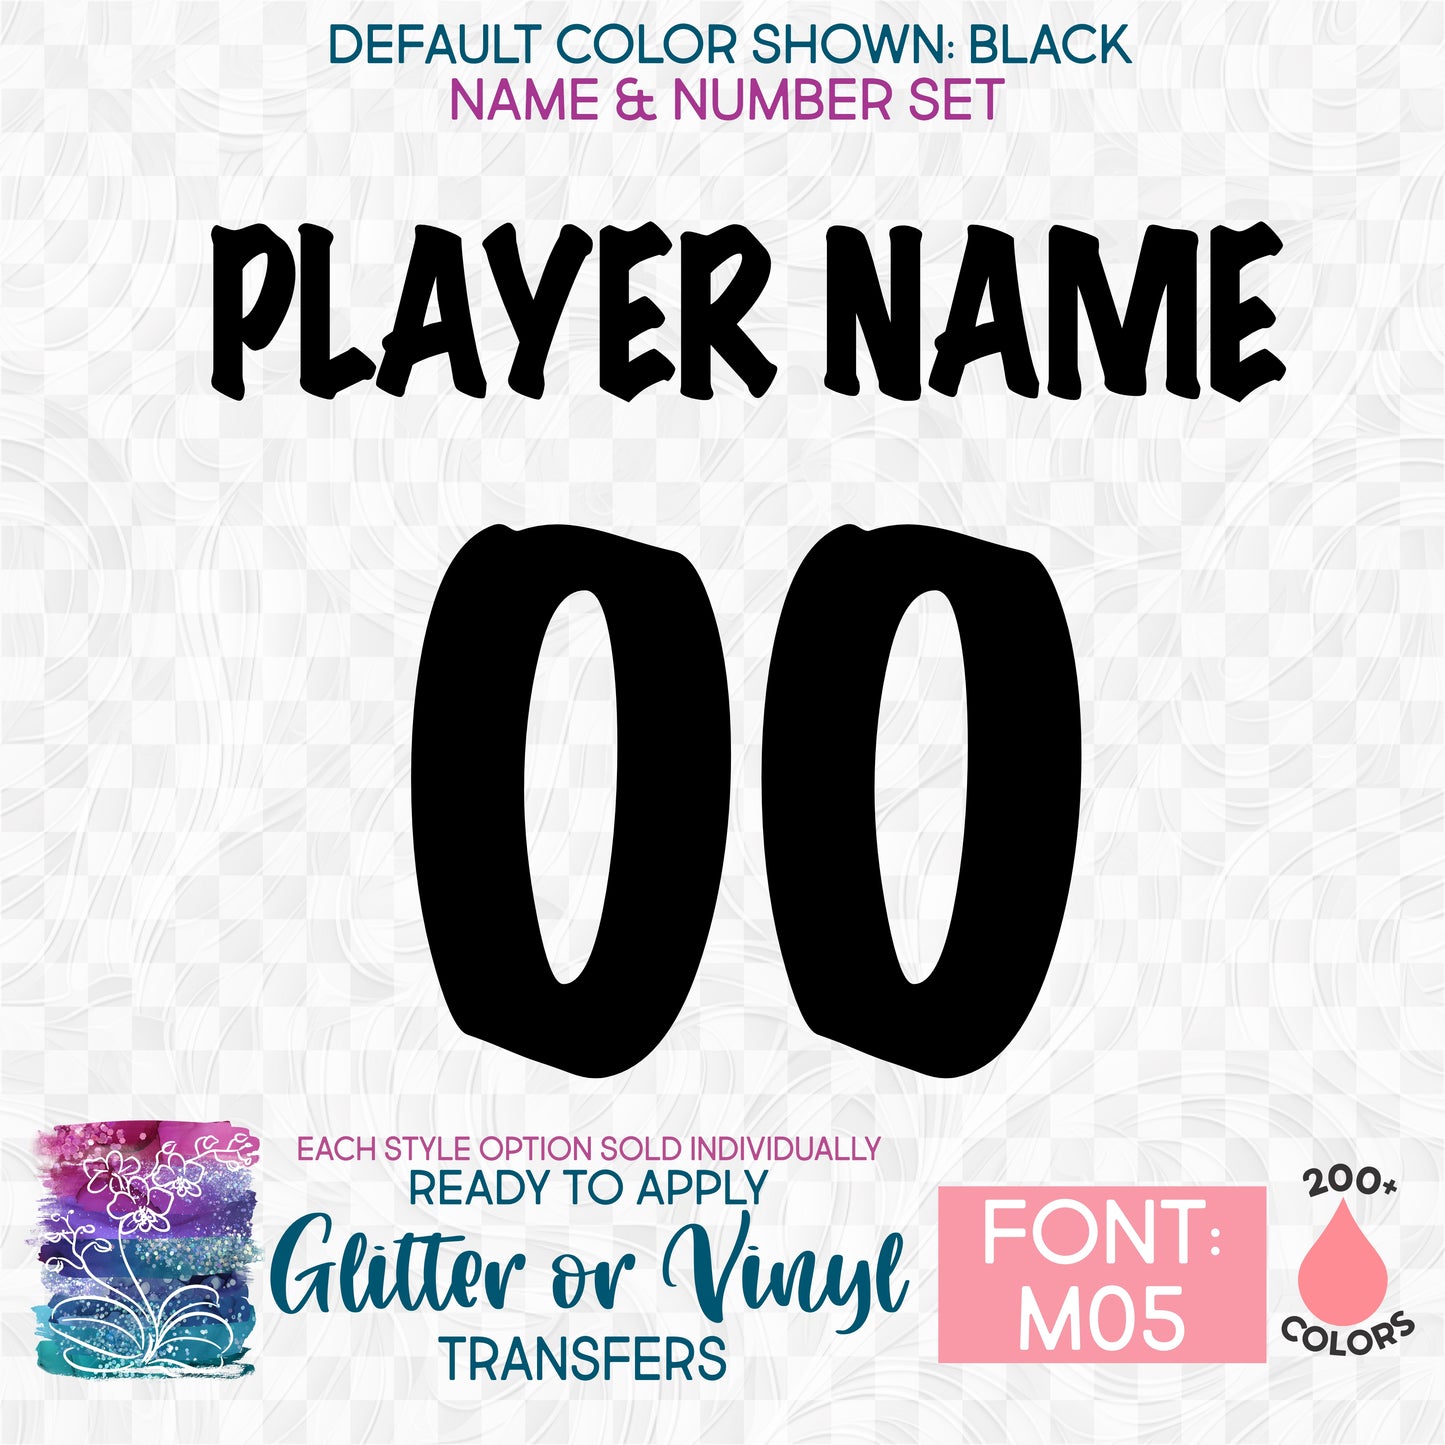 s97-M05 Custom Player Perfect Name & Number Iron-On Transfer